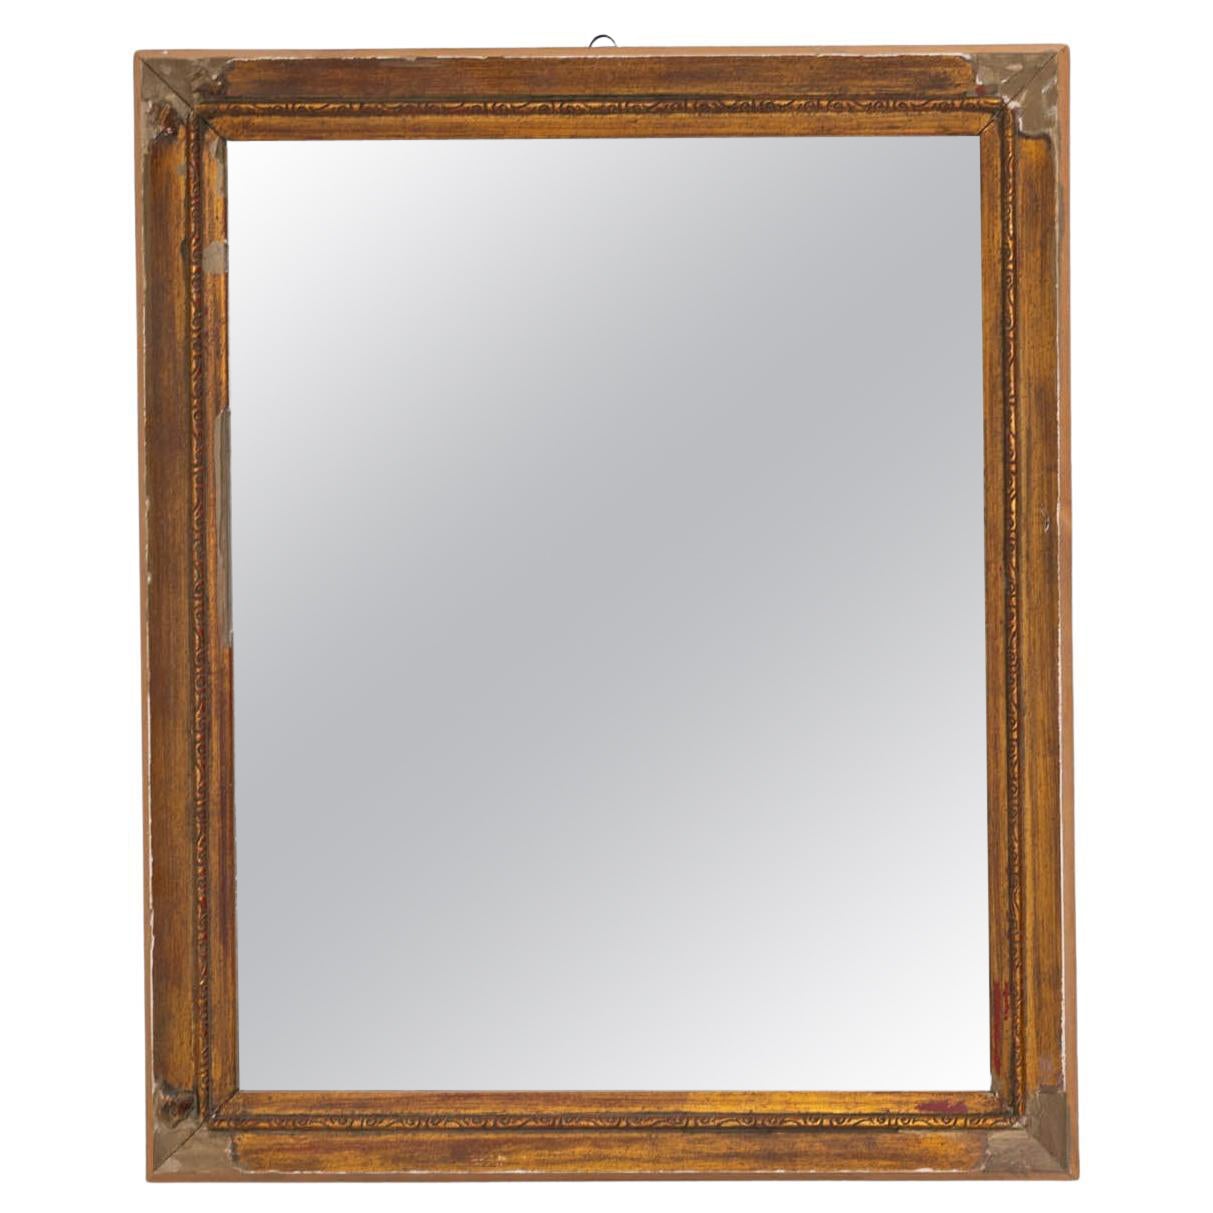 Early 20th Century French Gilded Wooden Mirror For Sale